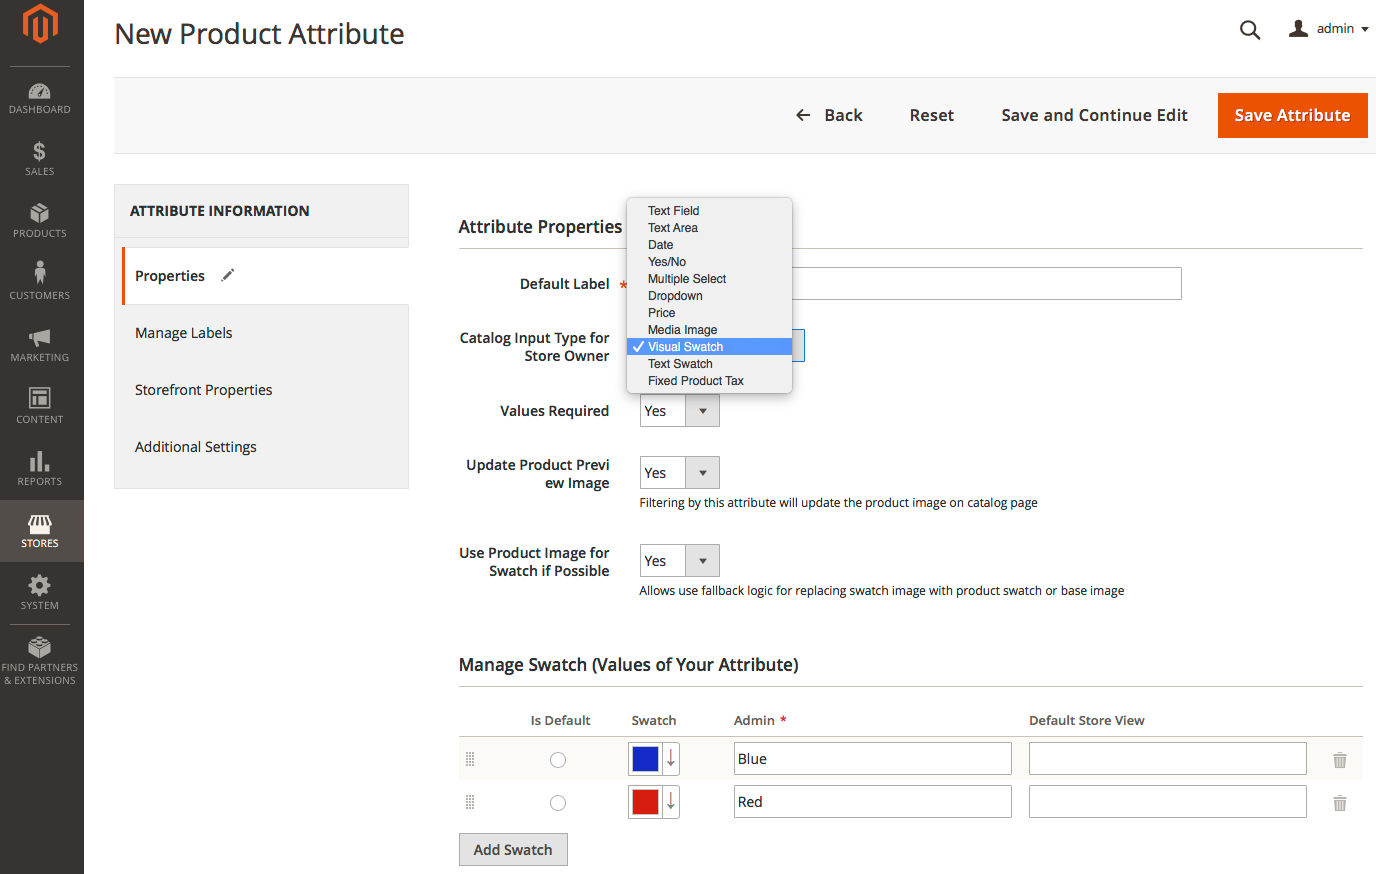 How to add attributes in Magento 2